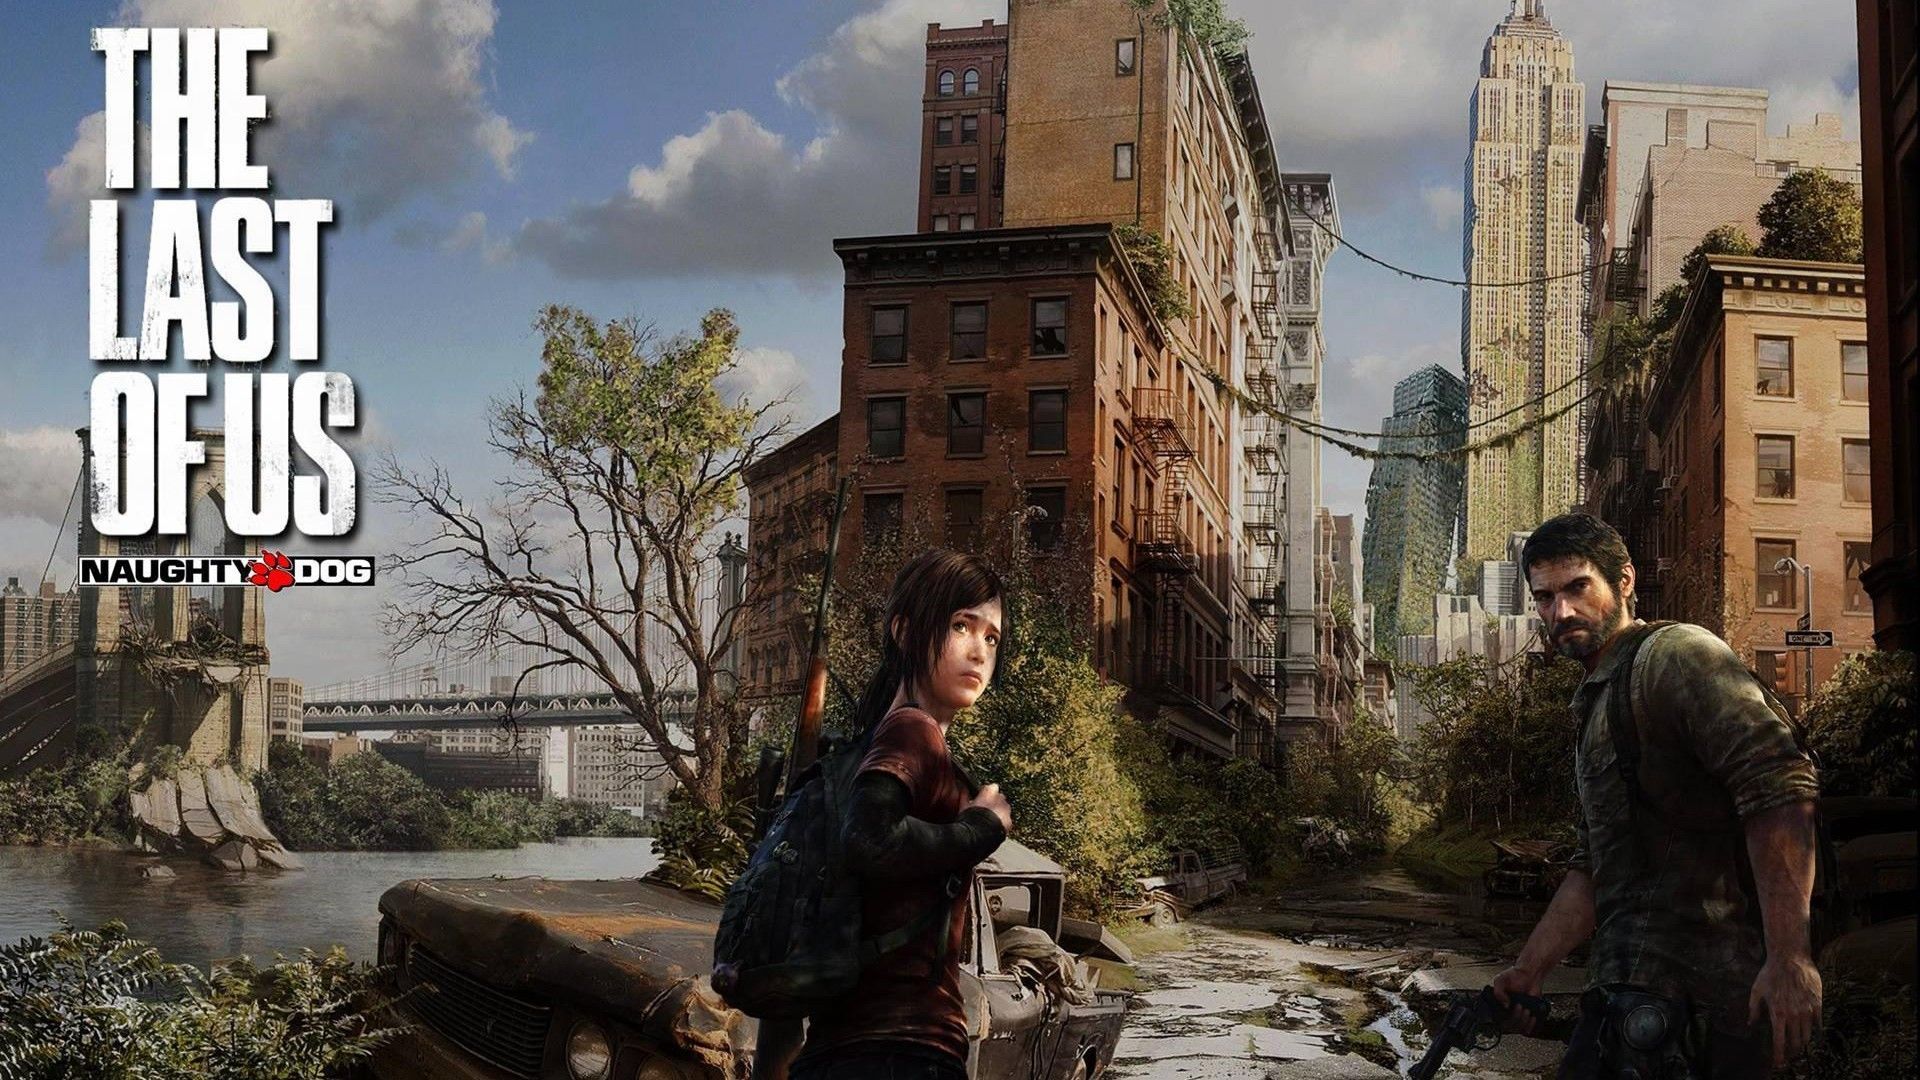 The Last of Us 1080p 1920x1080 wallpaper download. The last of us